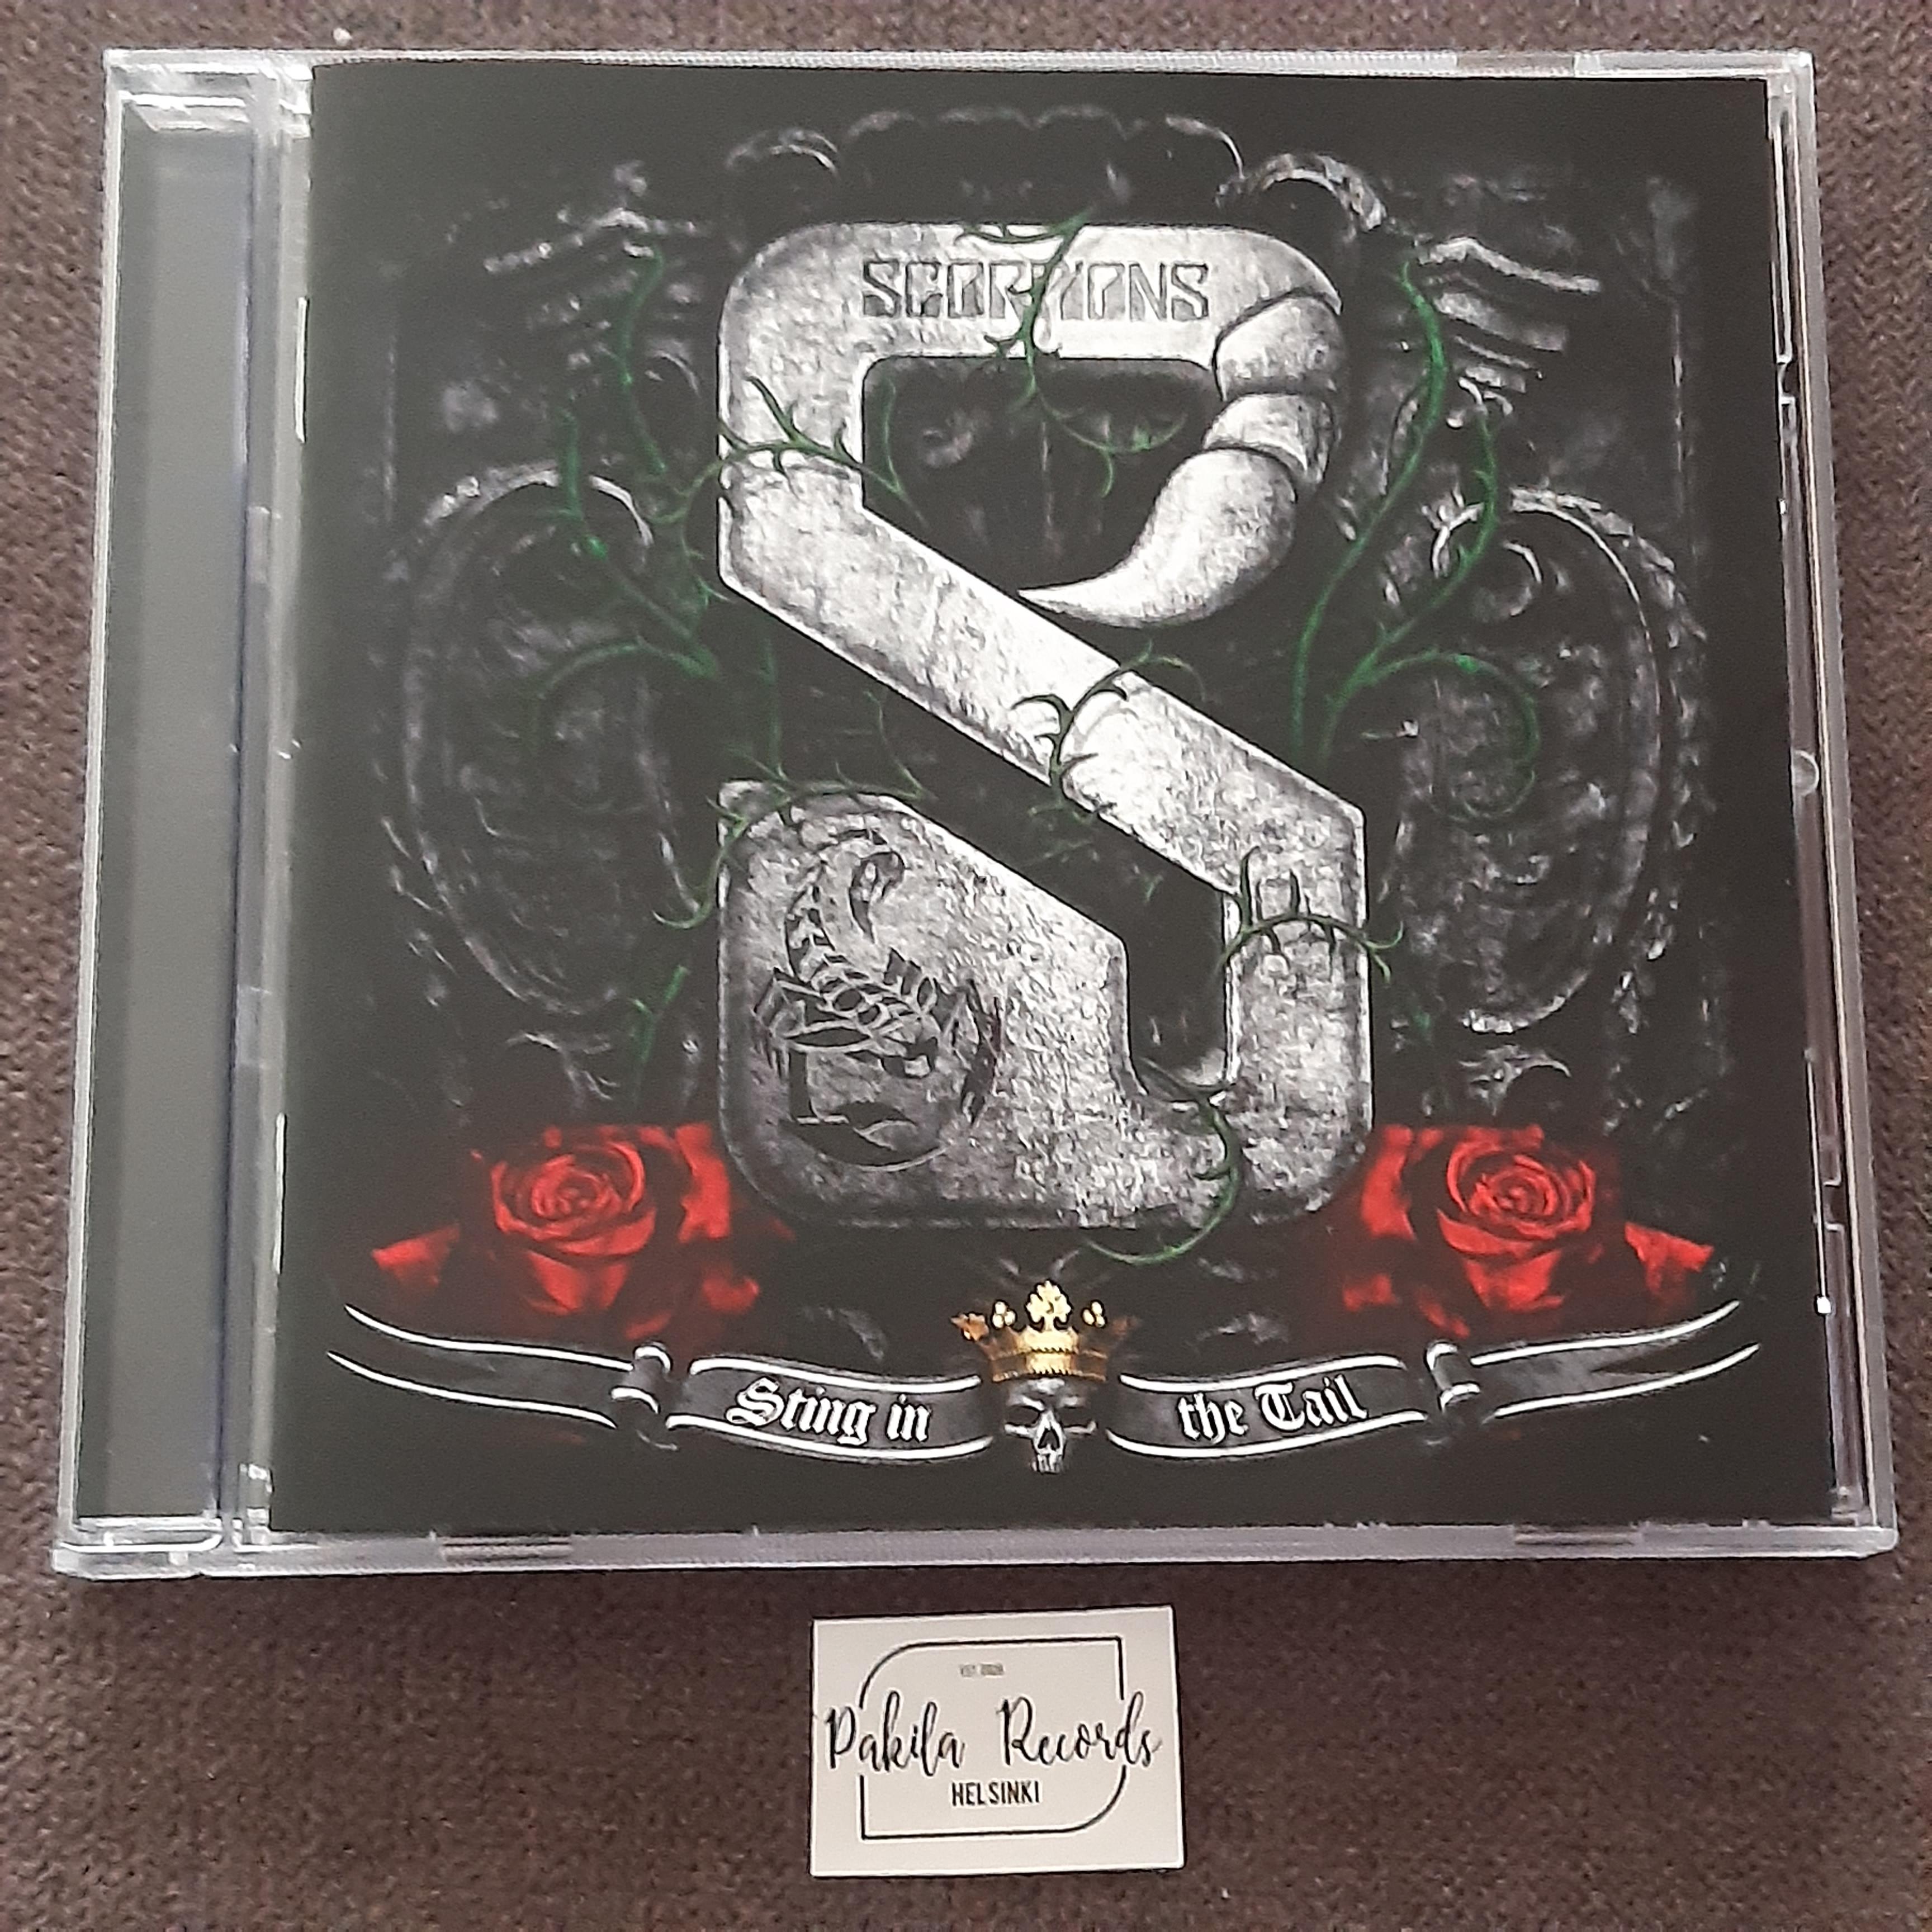 Scorpions - Sting In The Tail - CD (käytetty)